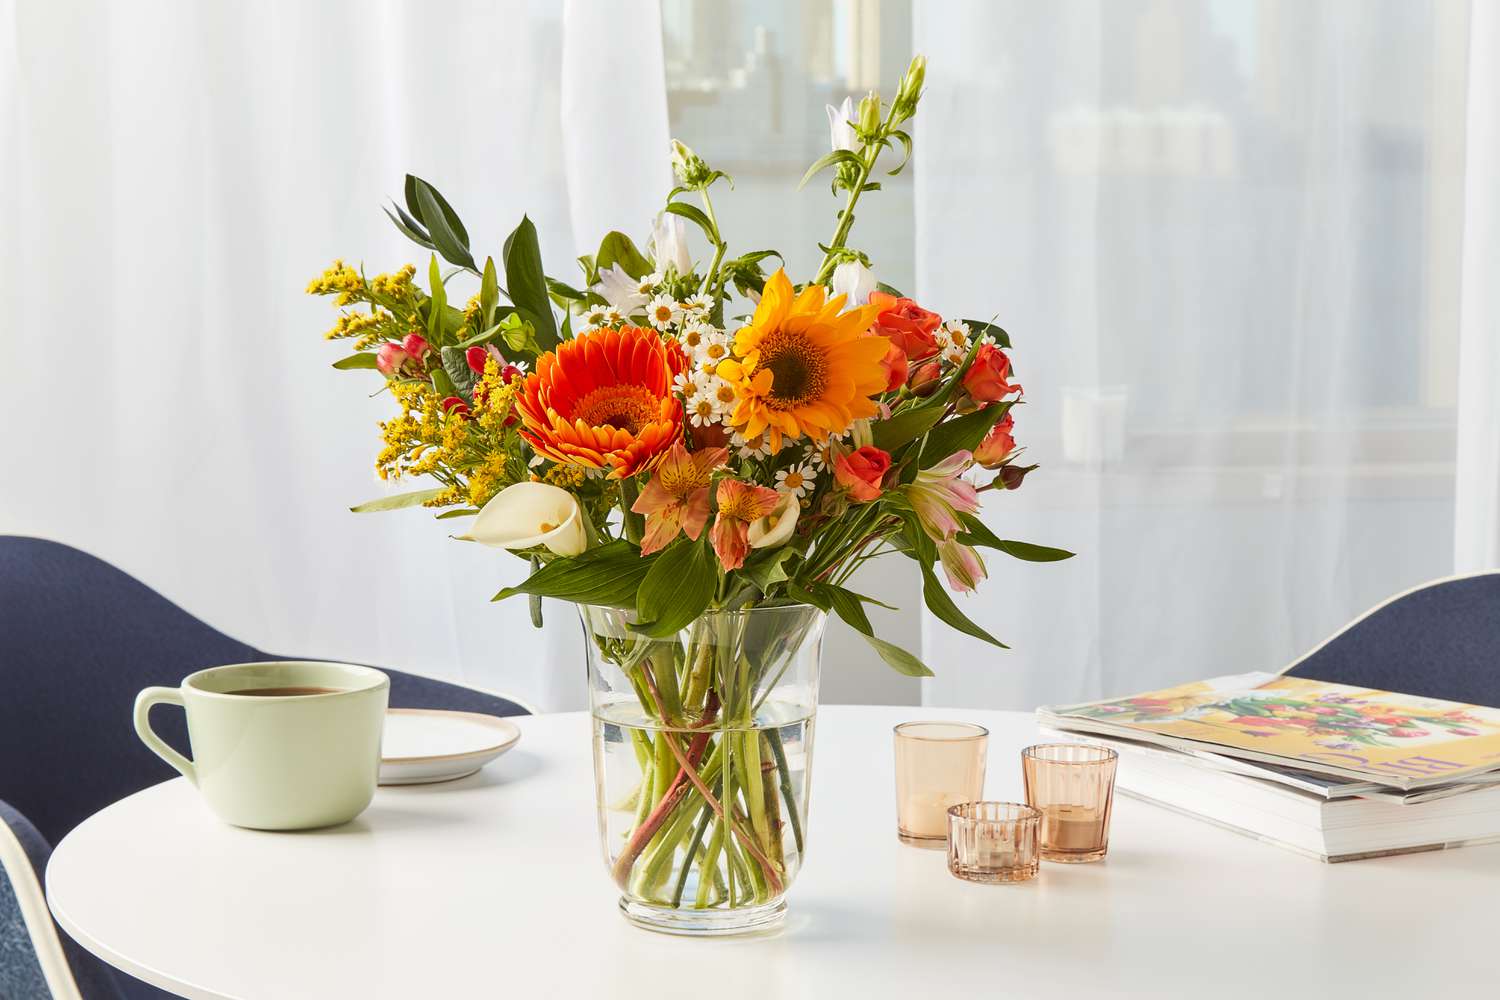 What To Put In A Vase With Flowers